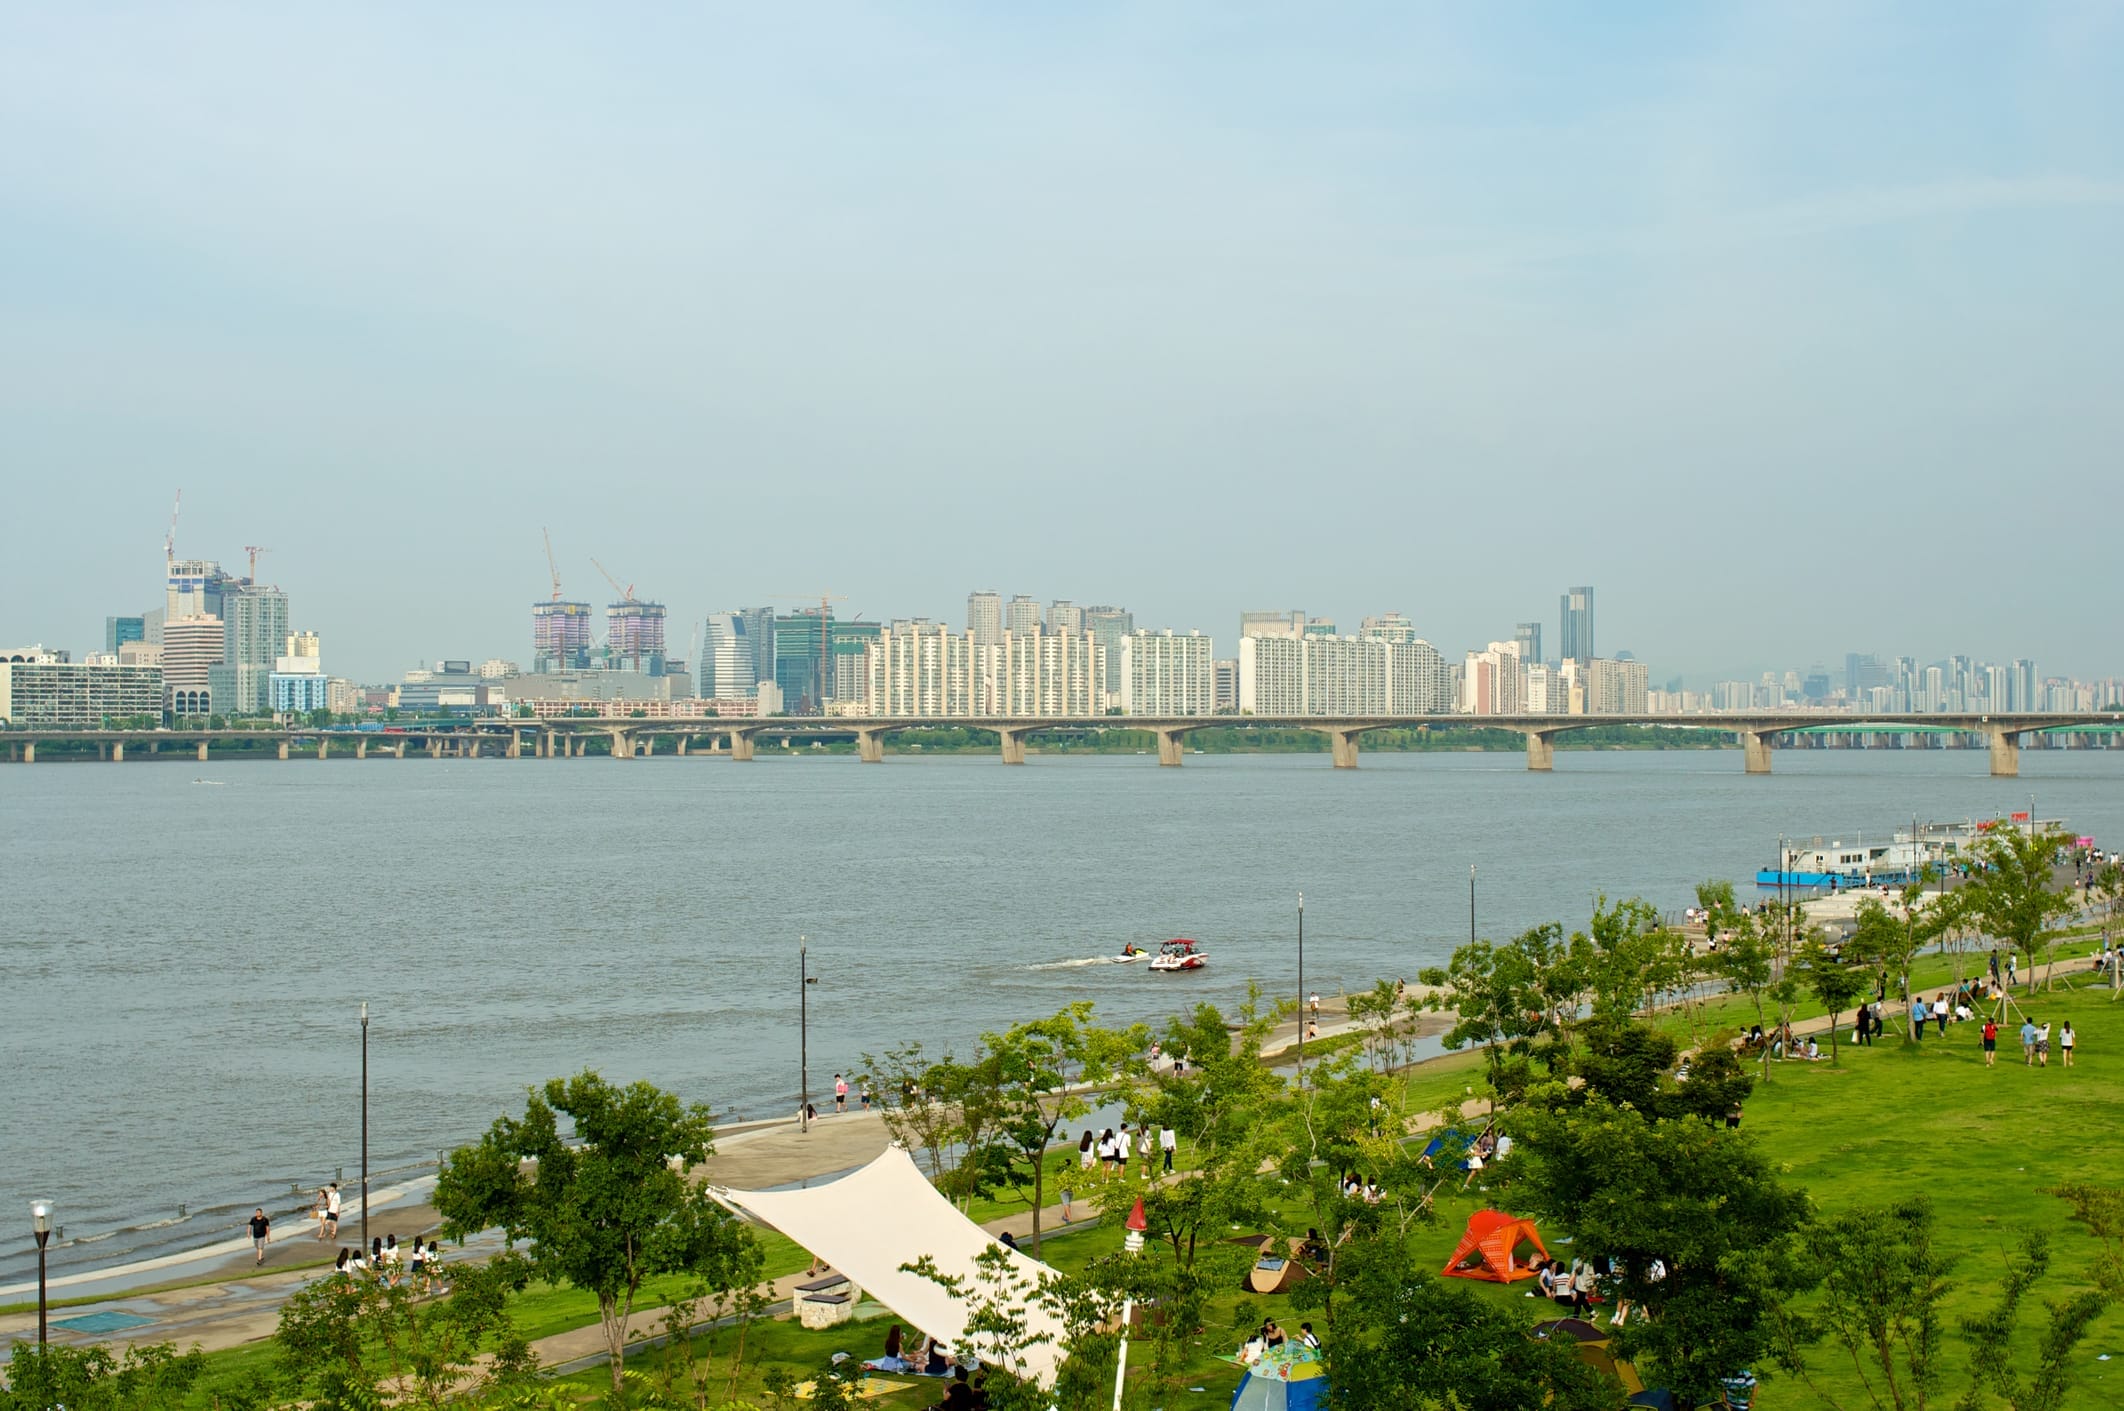 Summer Getaways in Seoul - 20+ Ways to Experience Nature in Seoul During Summer 2